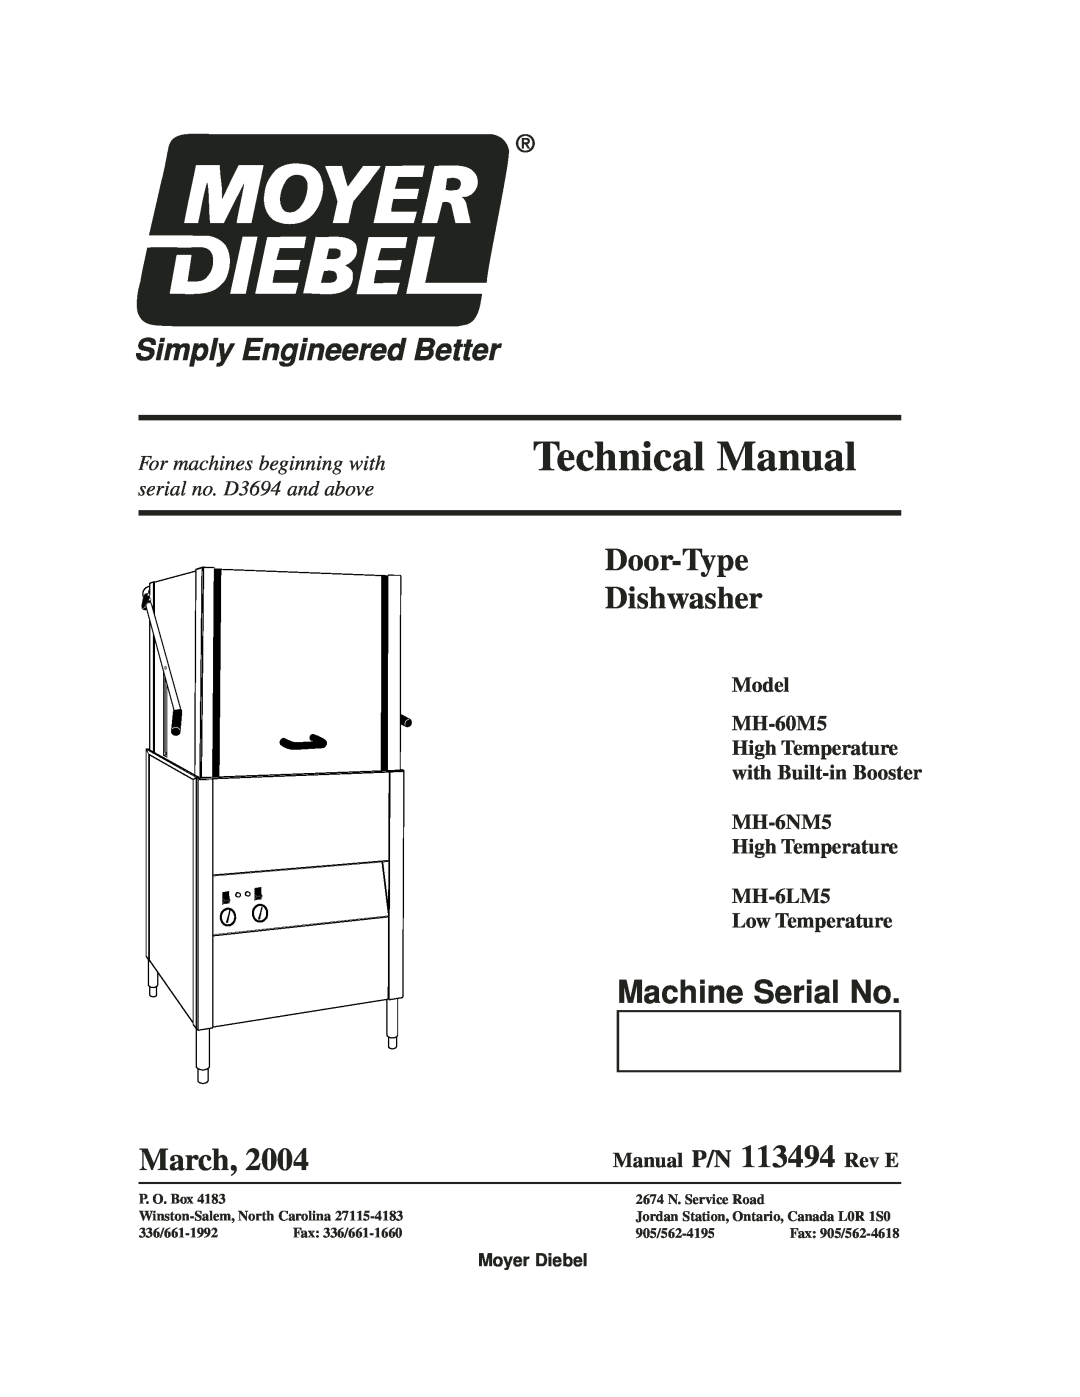 Moyer Diebel MH-6LM5 technical manual Technical Manual, Door-Type Dishwasher, Machine Serial No, March, Moyer Diebel 